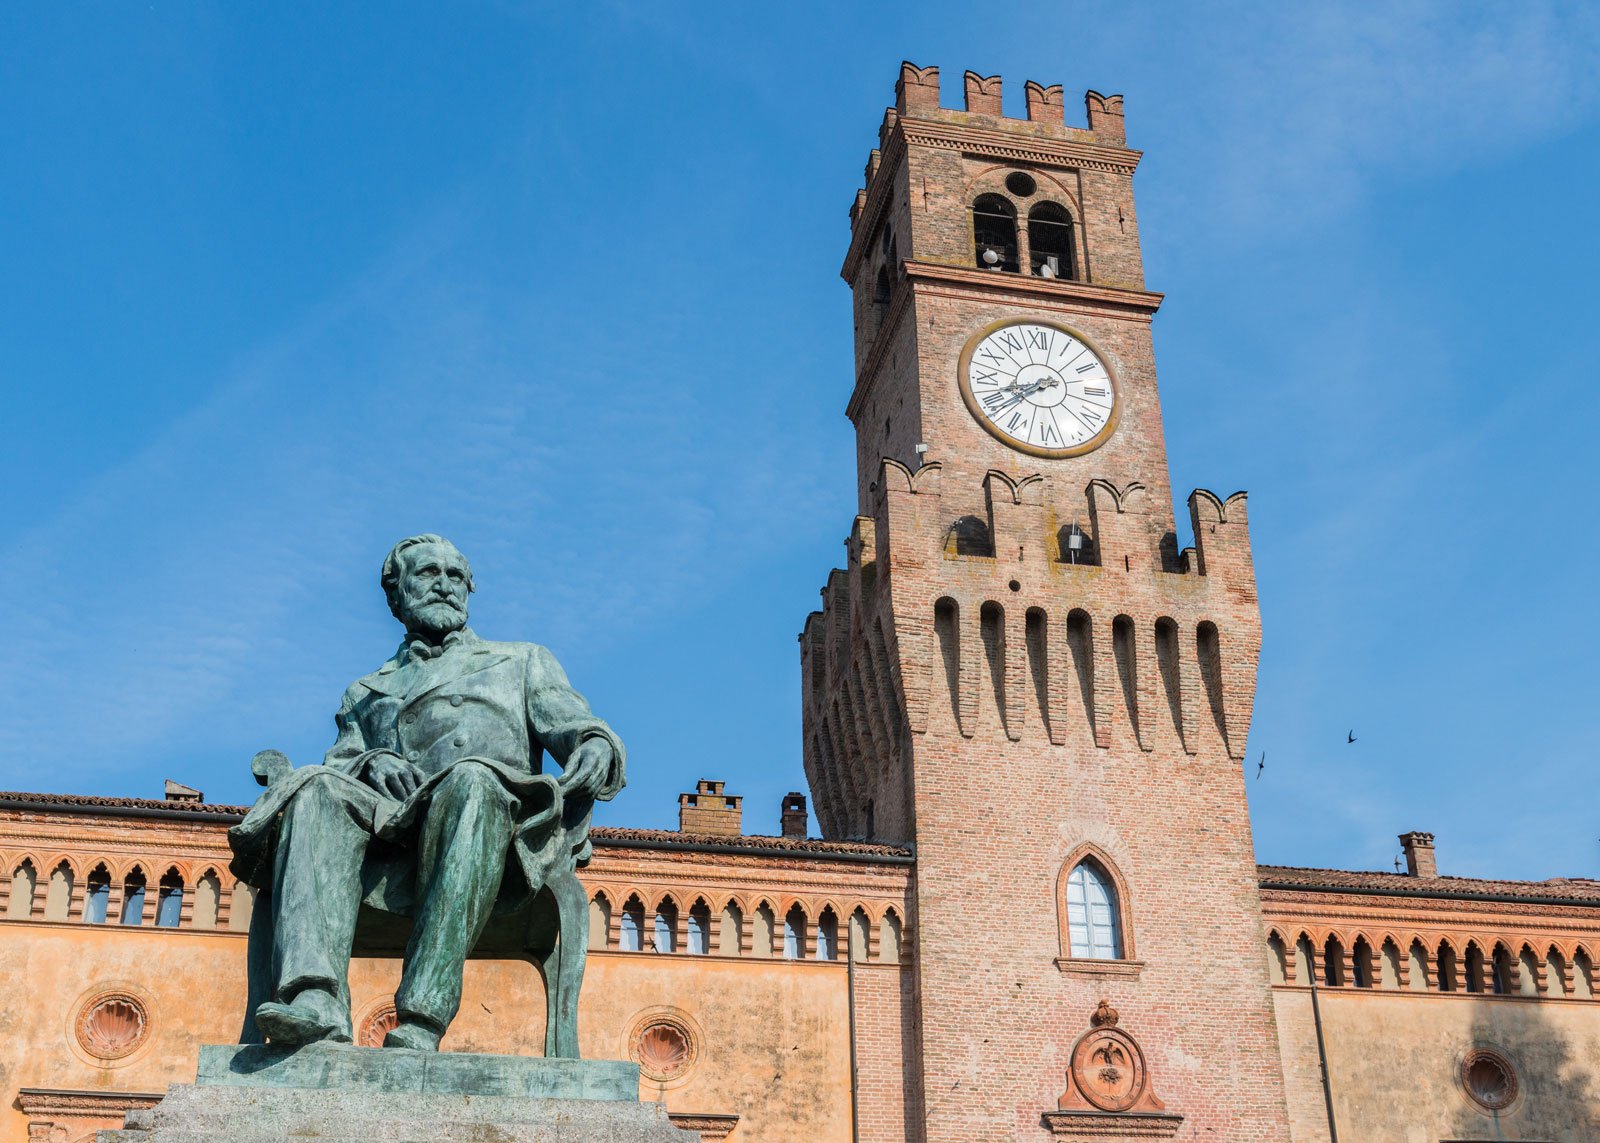 Giuseppe Verdi presides over Busseto, one of the town's most strongly associated with his life and career